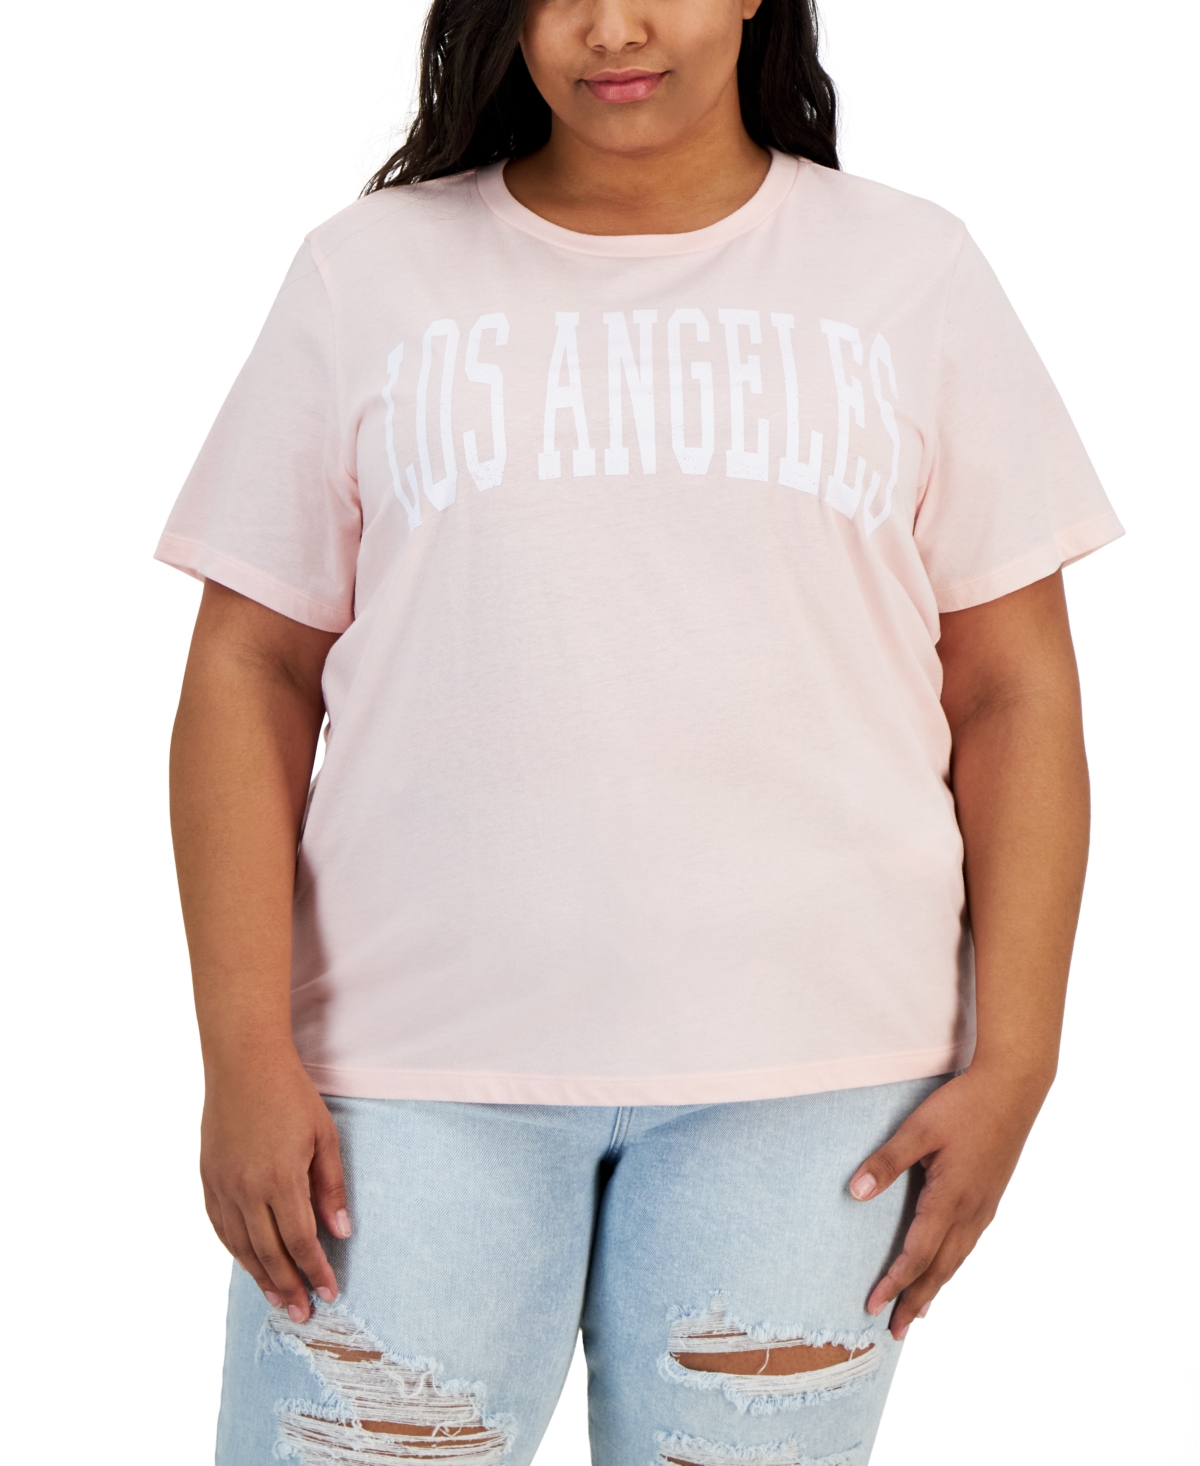 Oversized Los Angeles Graphic T-shirt